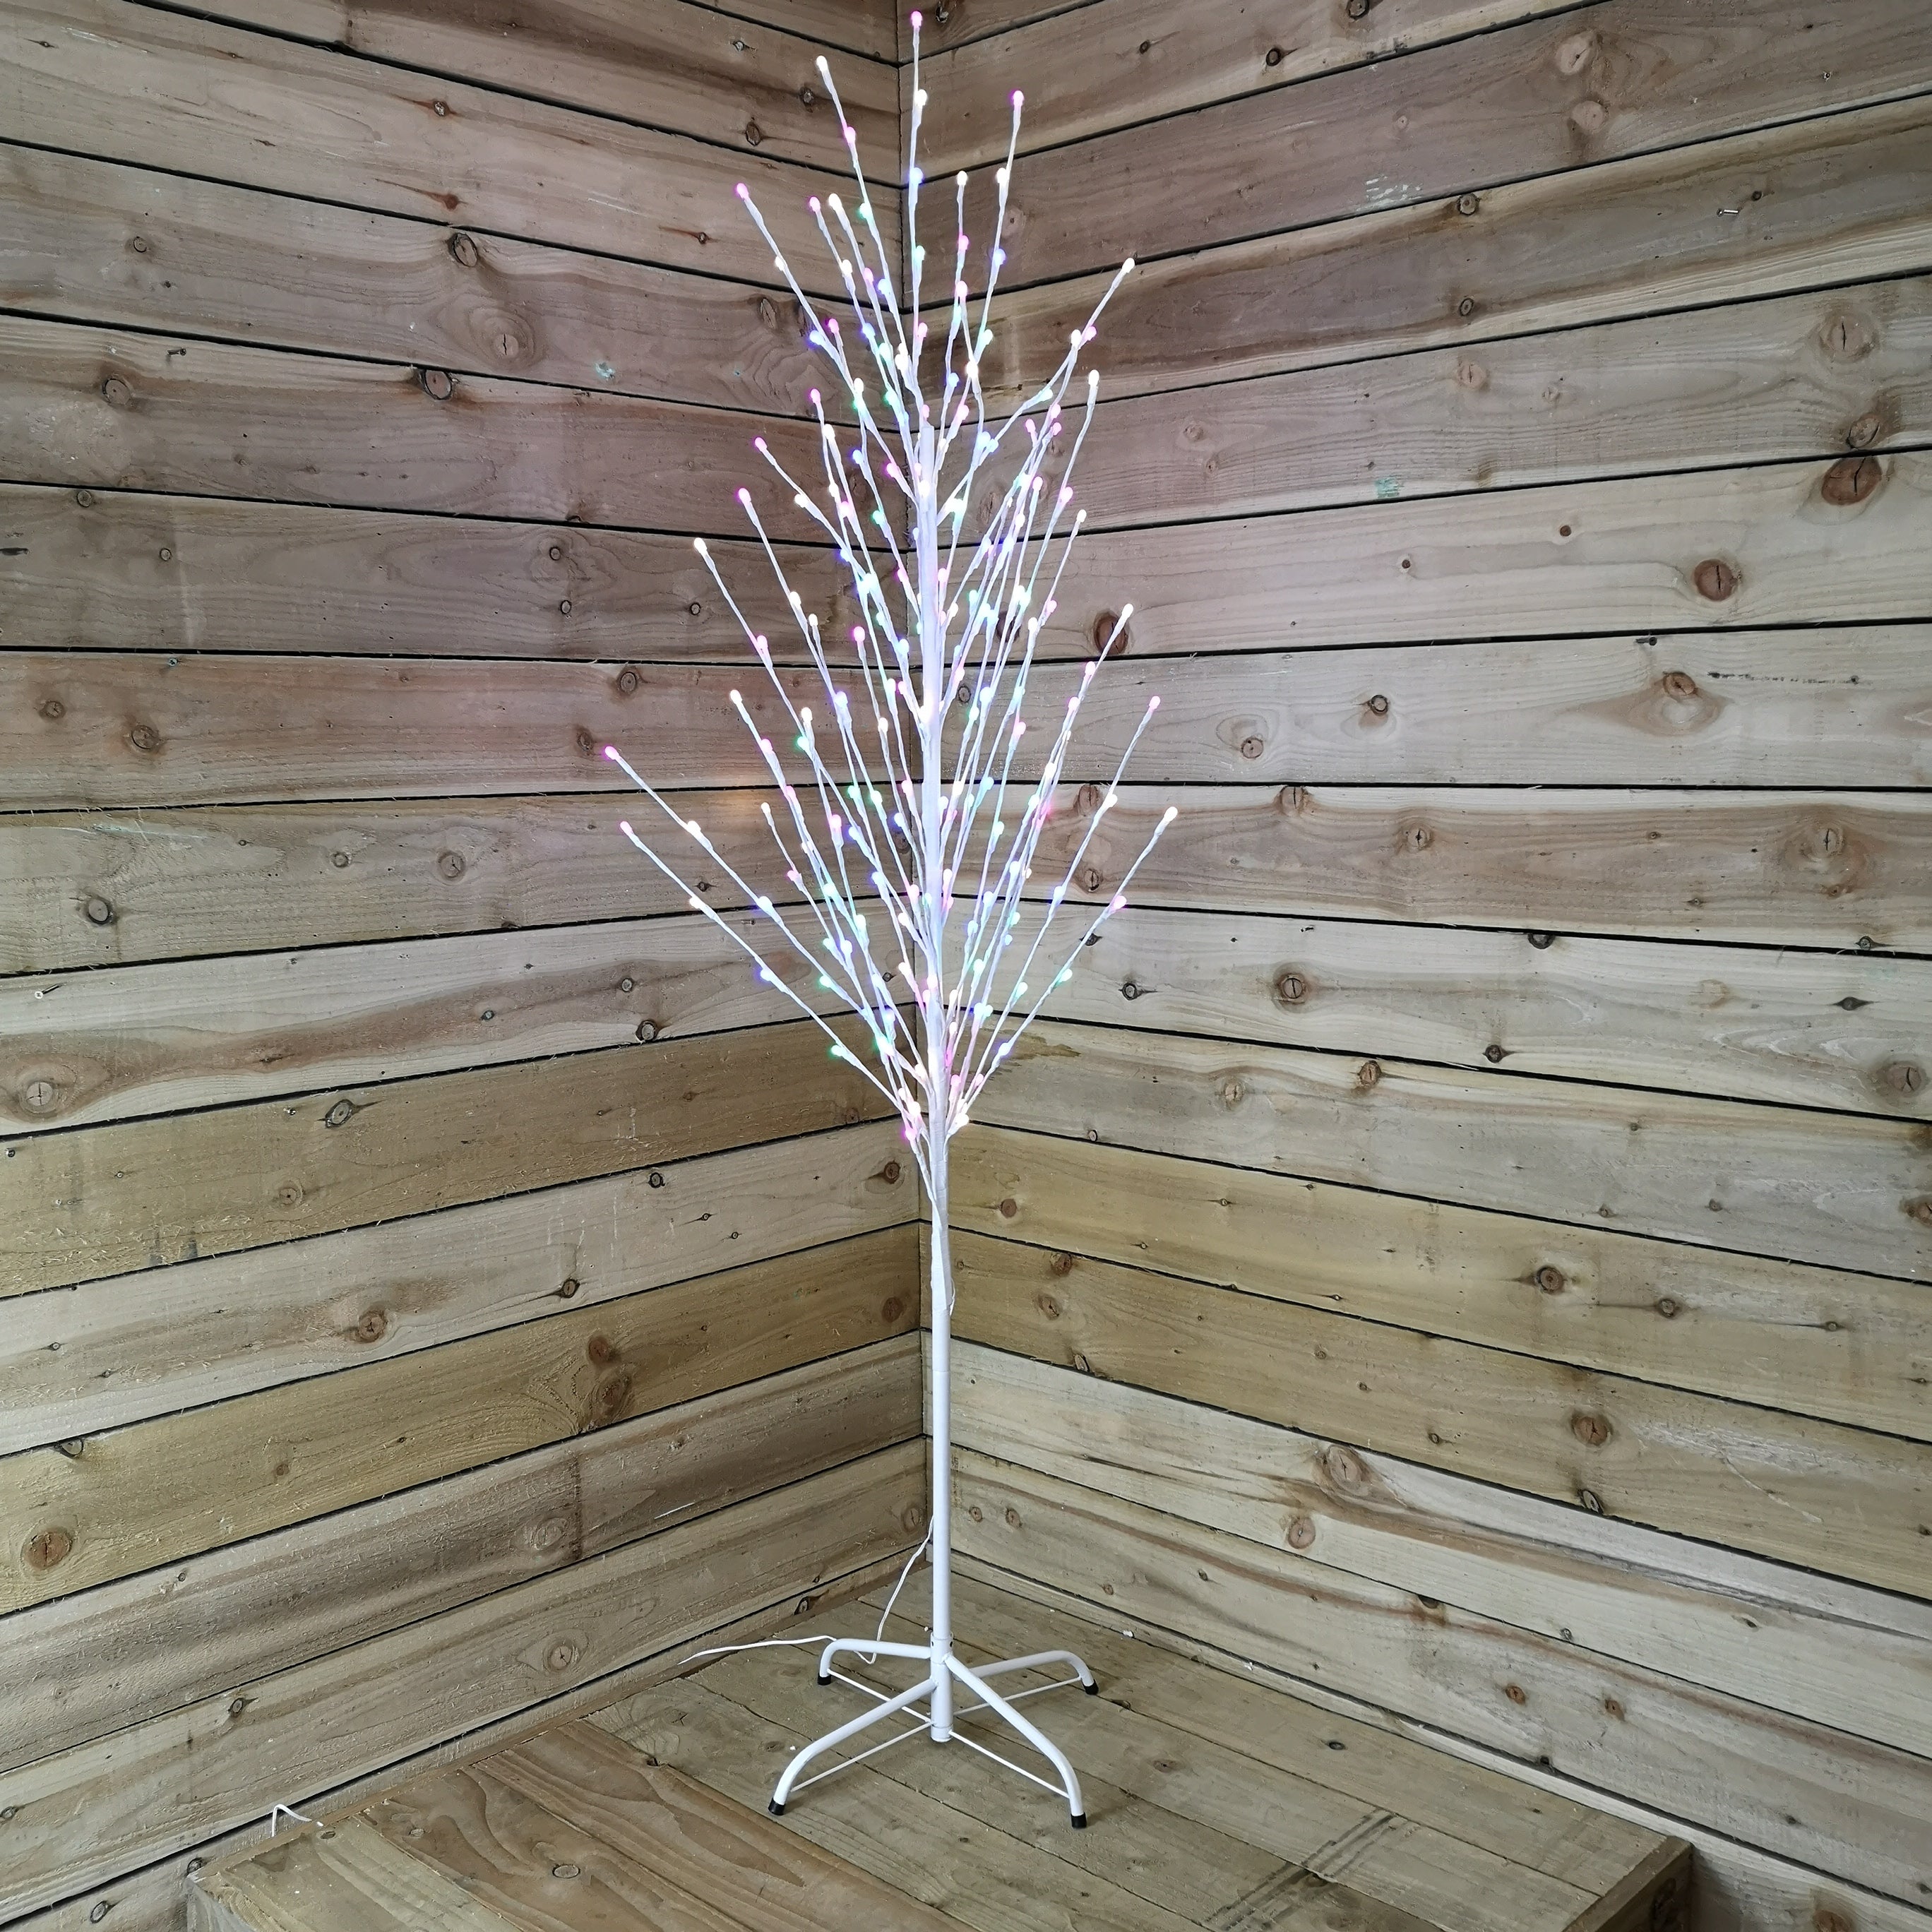 Snowtime 1.8m Rainbow Light Up Tree With Pink, WarmWhite, Blue & Green LEDs